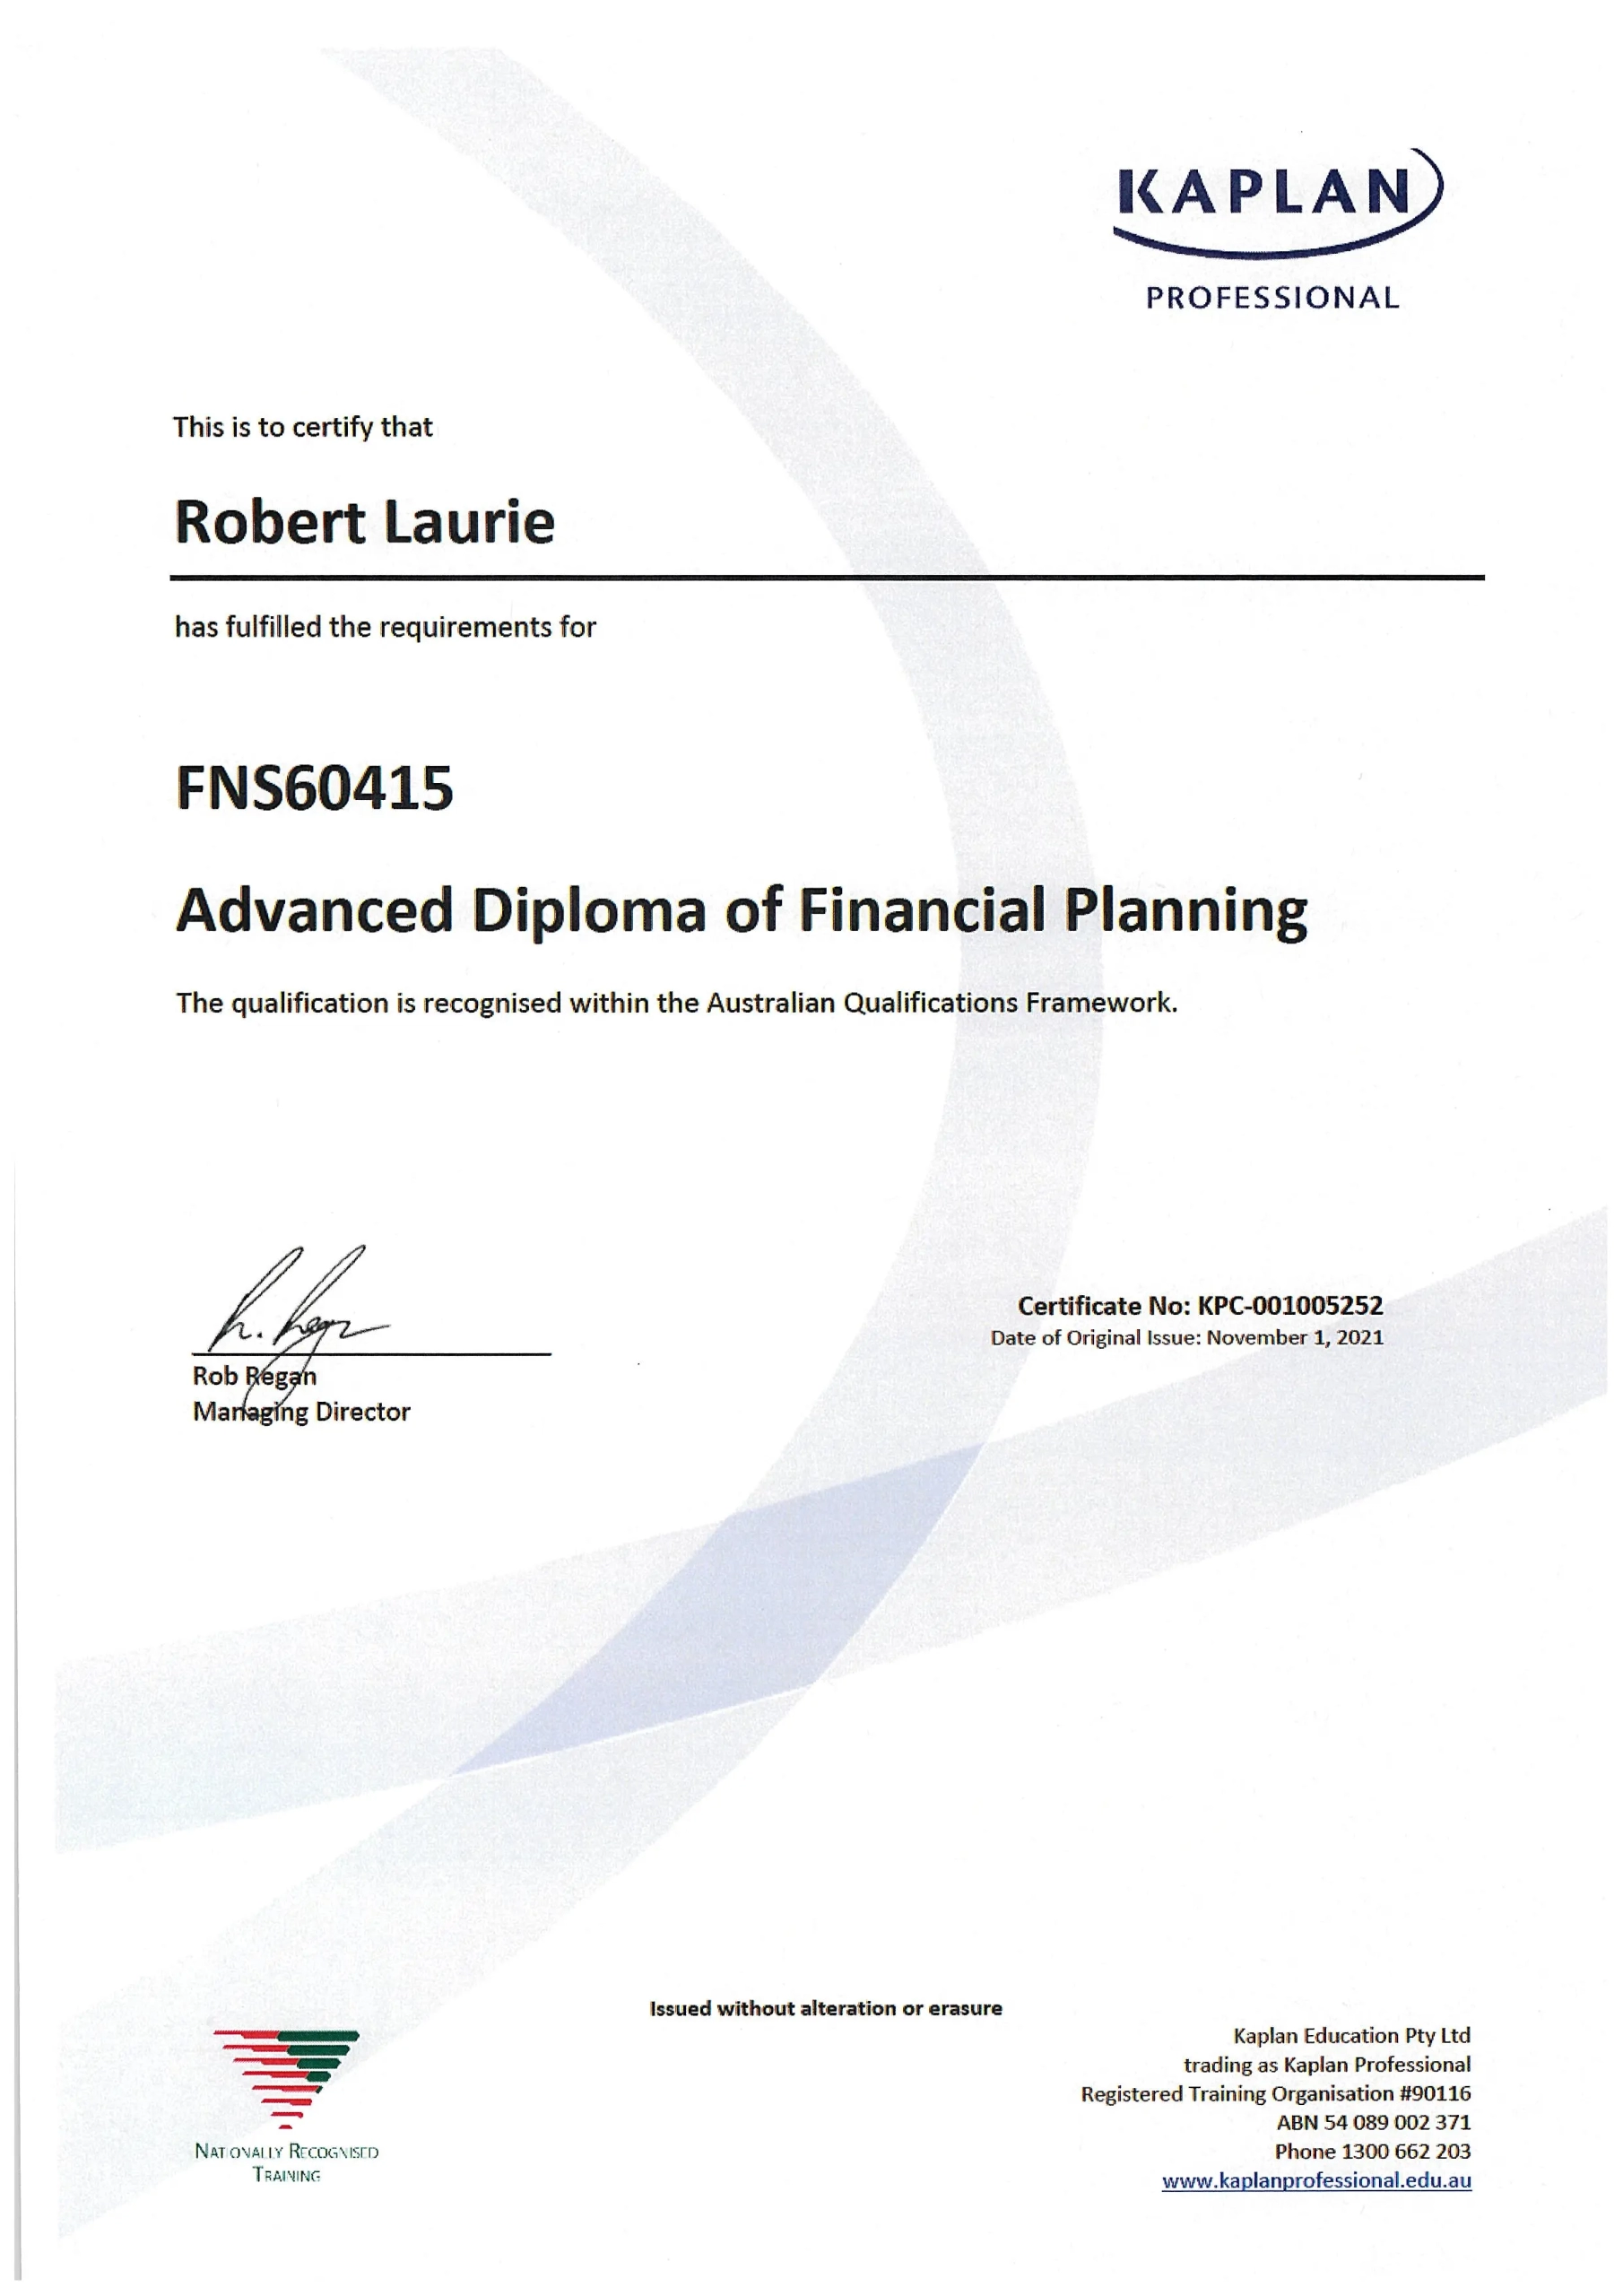 Advanced Diploma of Financial Planning Certificate.